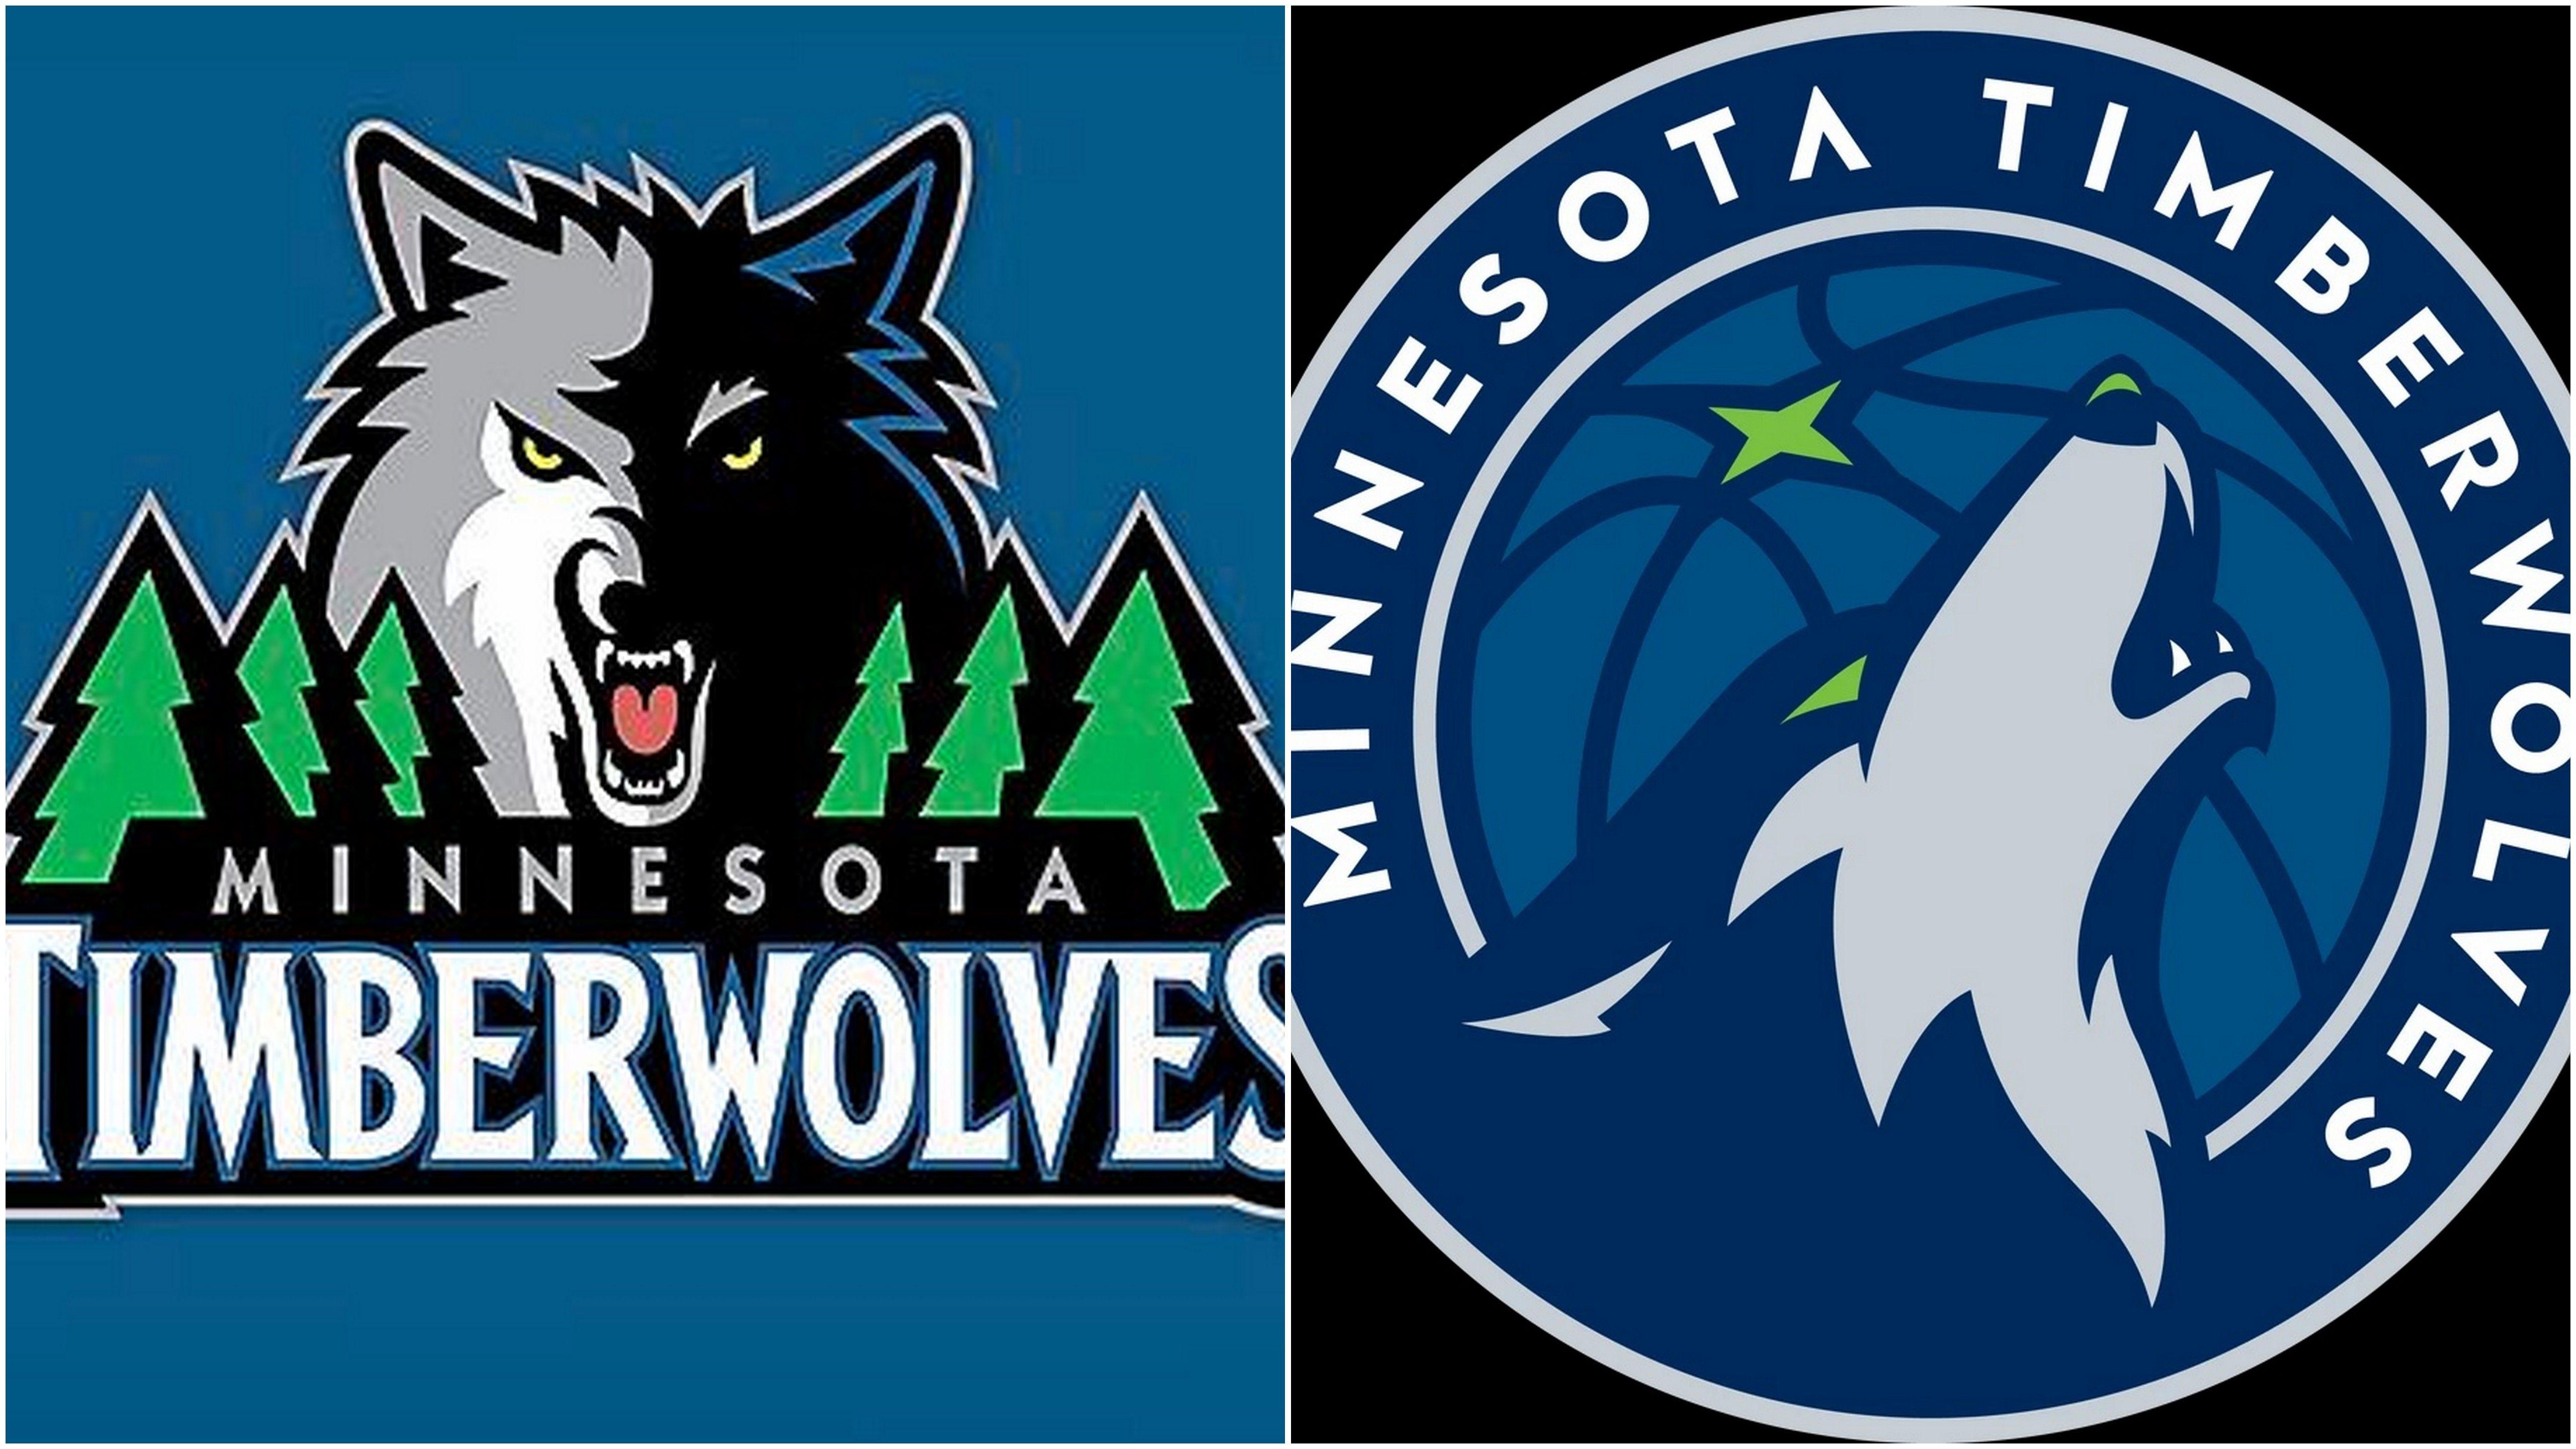 Timberwolves Logo - Poll: What do you think of the new Timberwolves logo? – Twin Cities